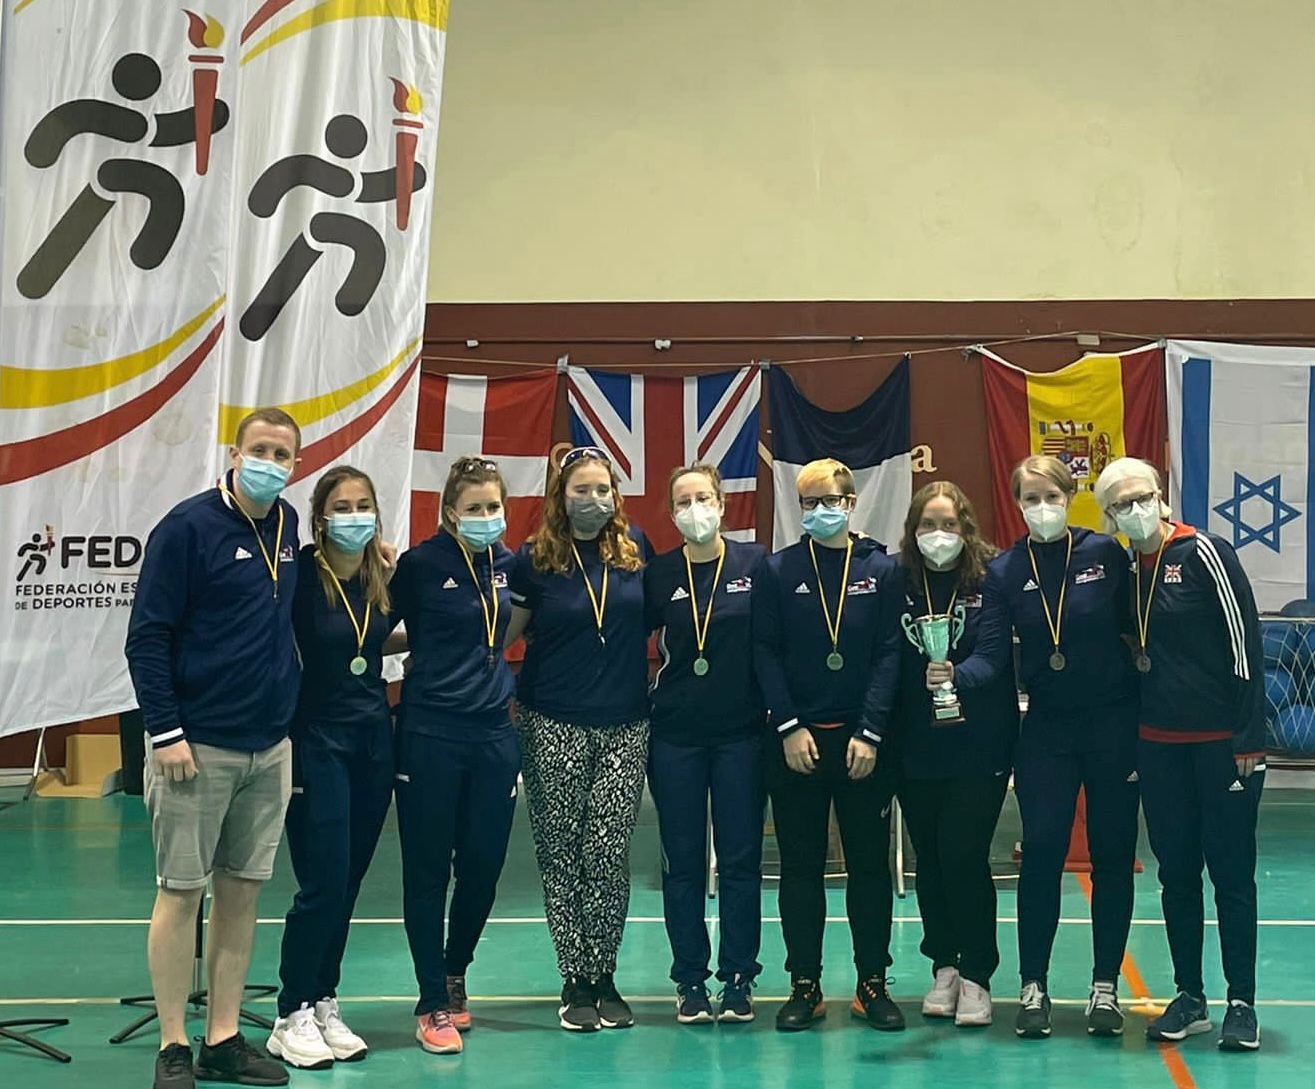 GB Women's team stood together in a line after receiving their silver medal at a tournament in Madrid.